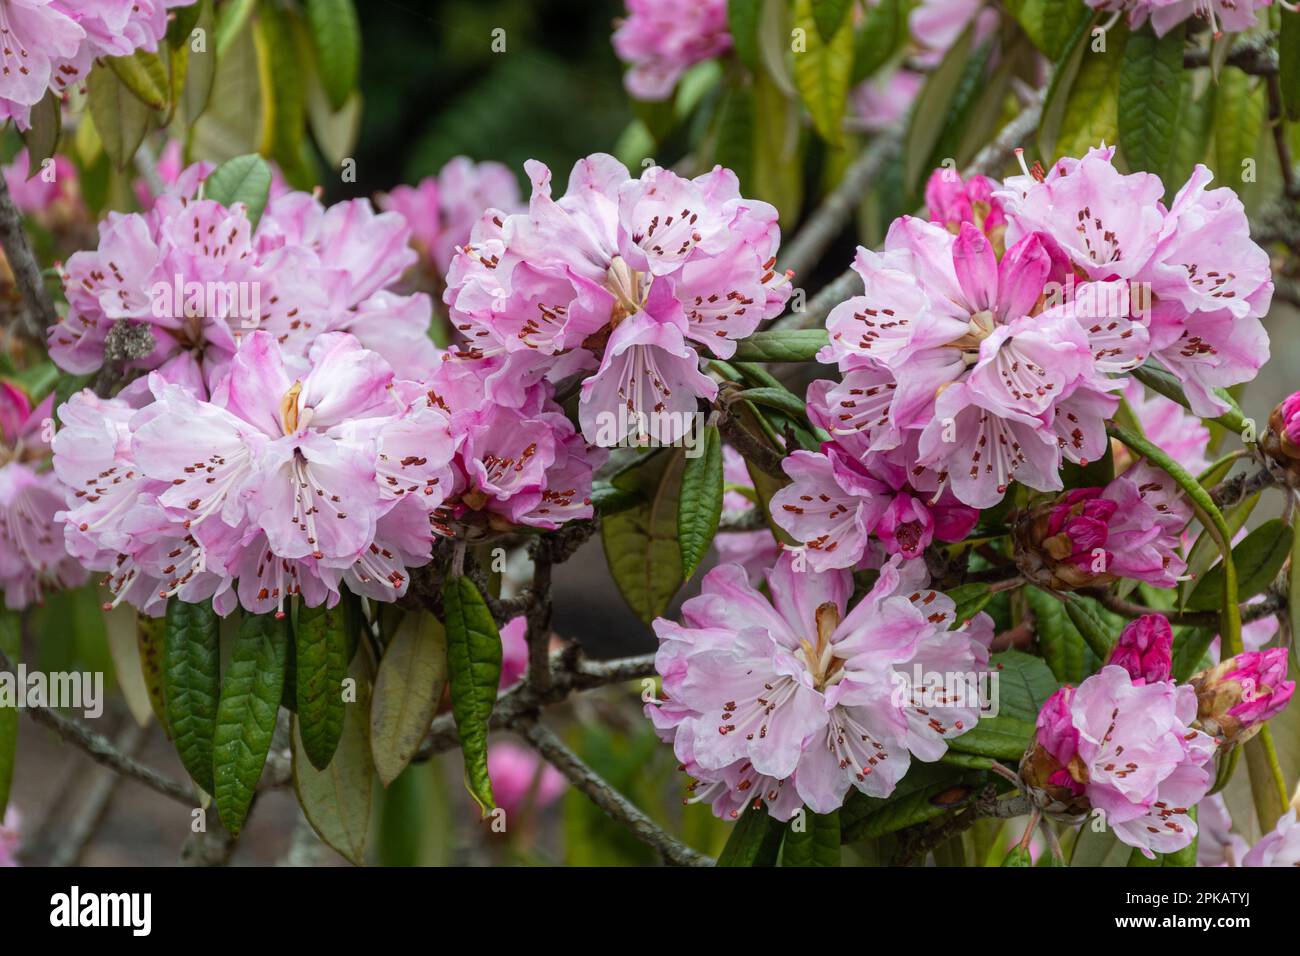 Pink flowers or blooms of Rhododendron floribundum (Subsection Argyrophylla) shrub or small tree in Spring Stock Photo